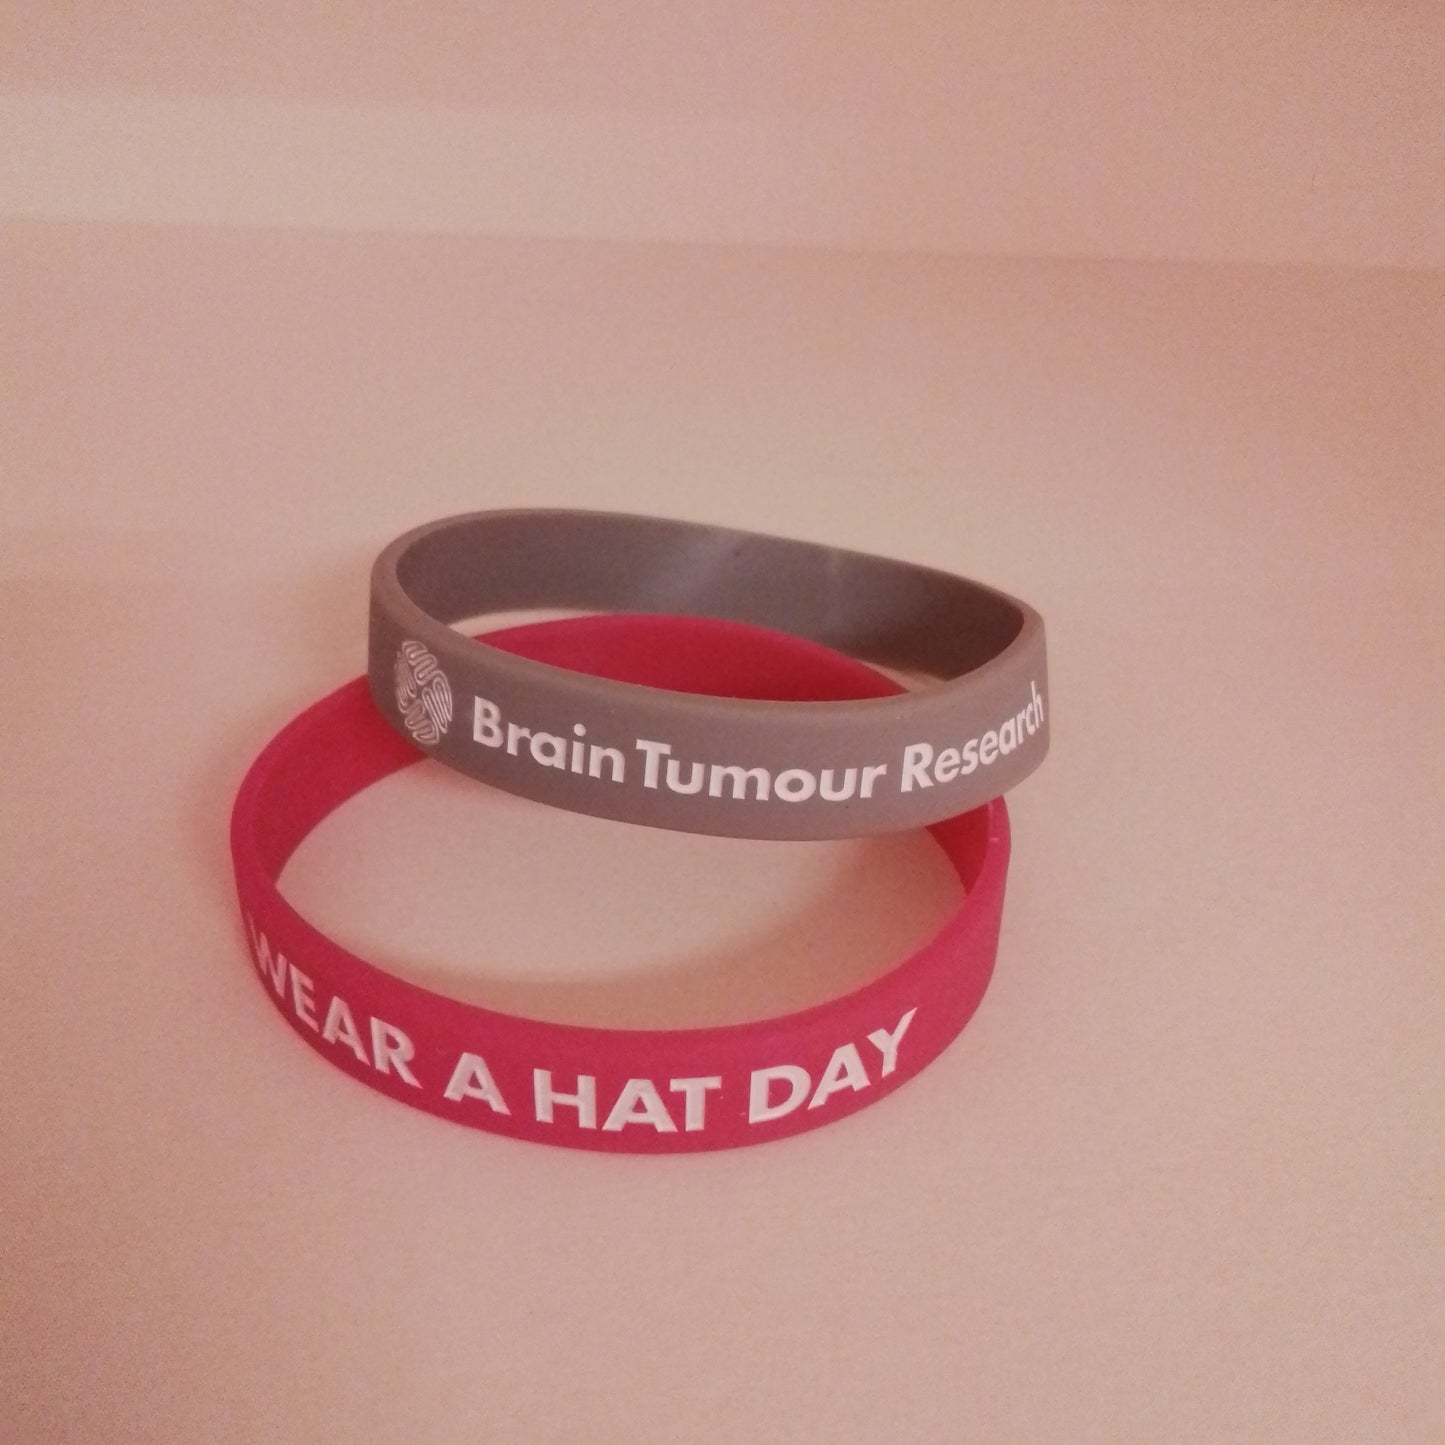 Wear A Hat Day Wristband - mixed box of 24 - 12 pink & 12 grey